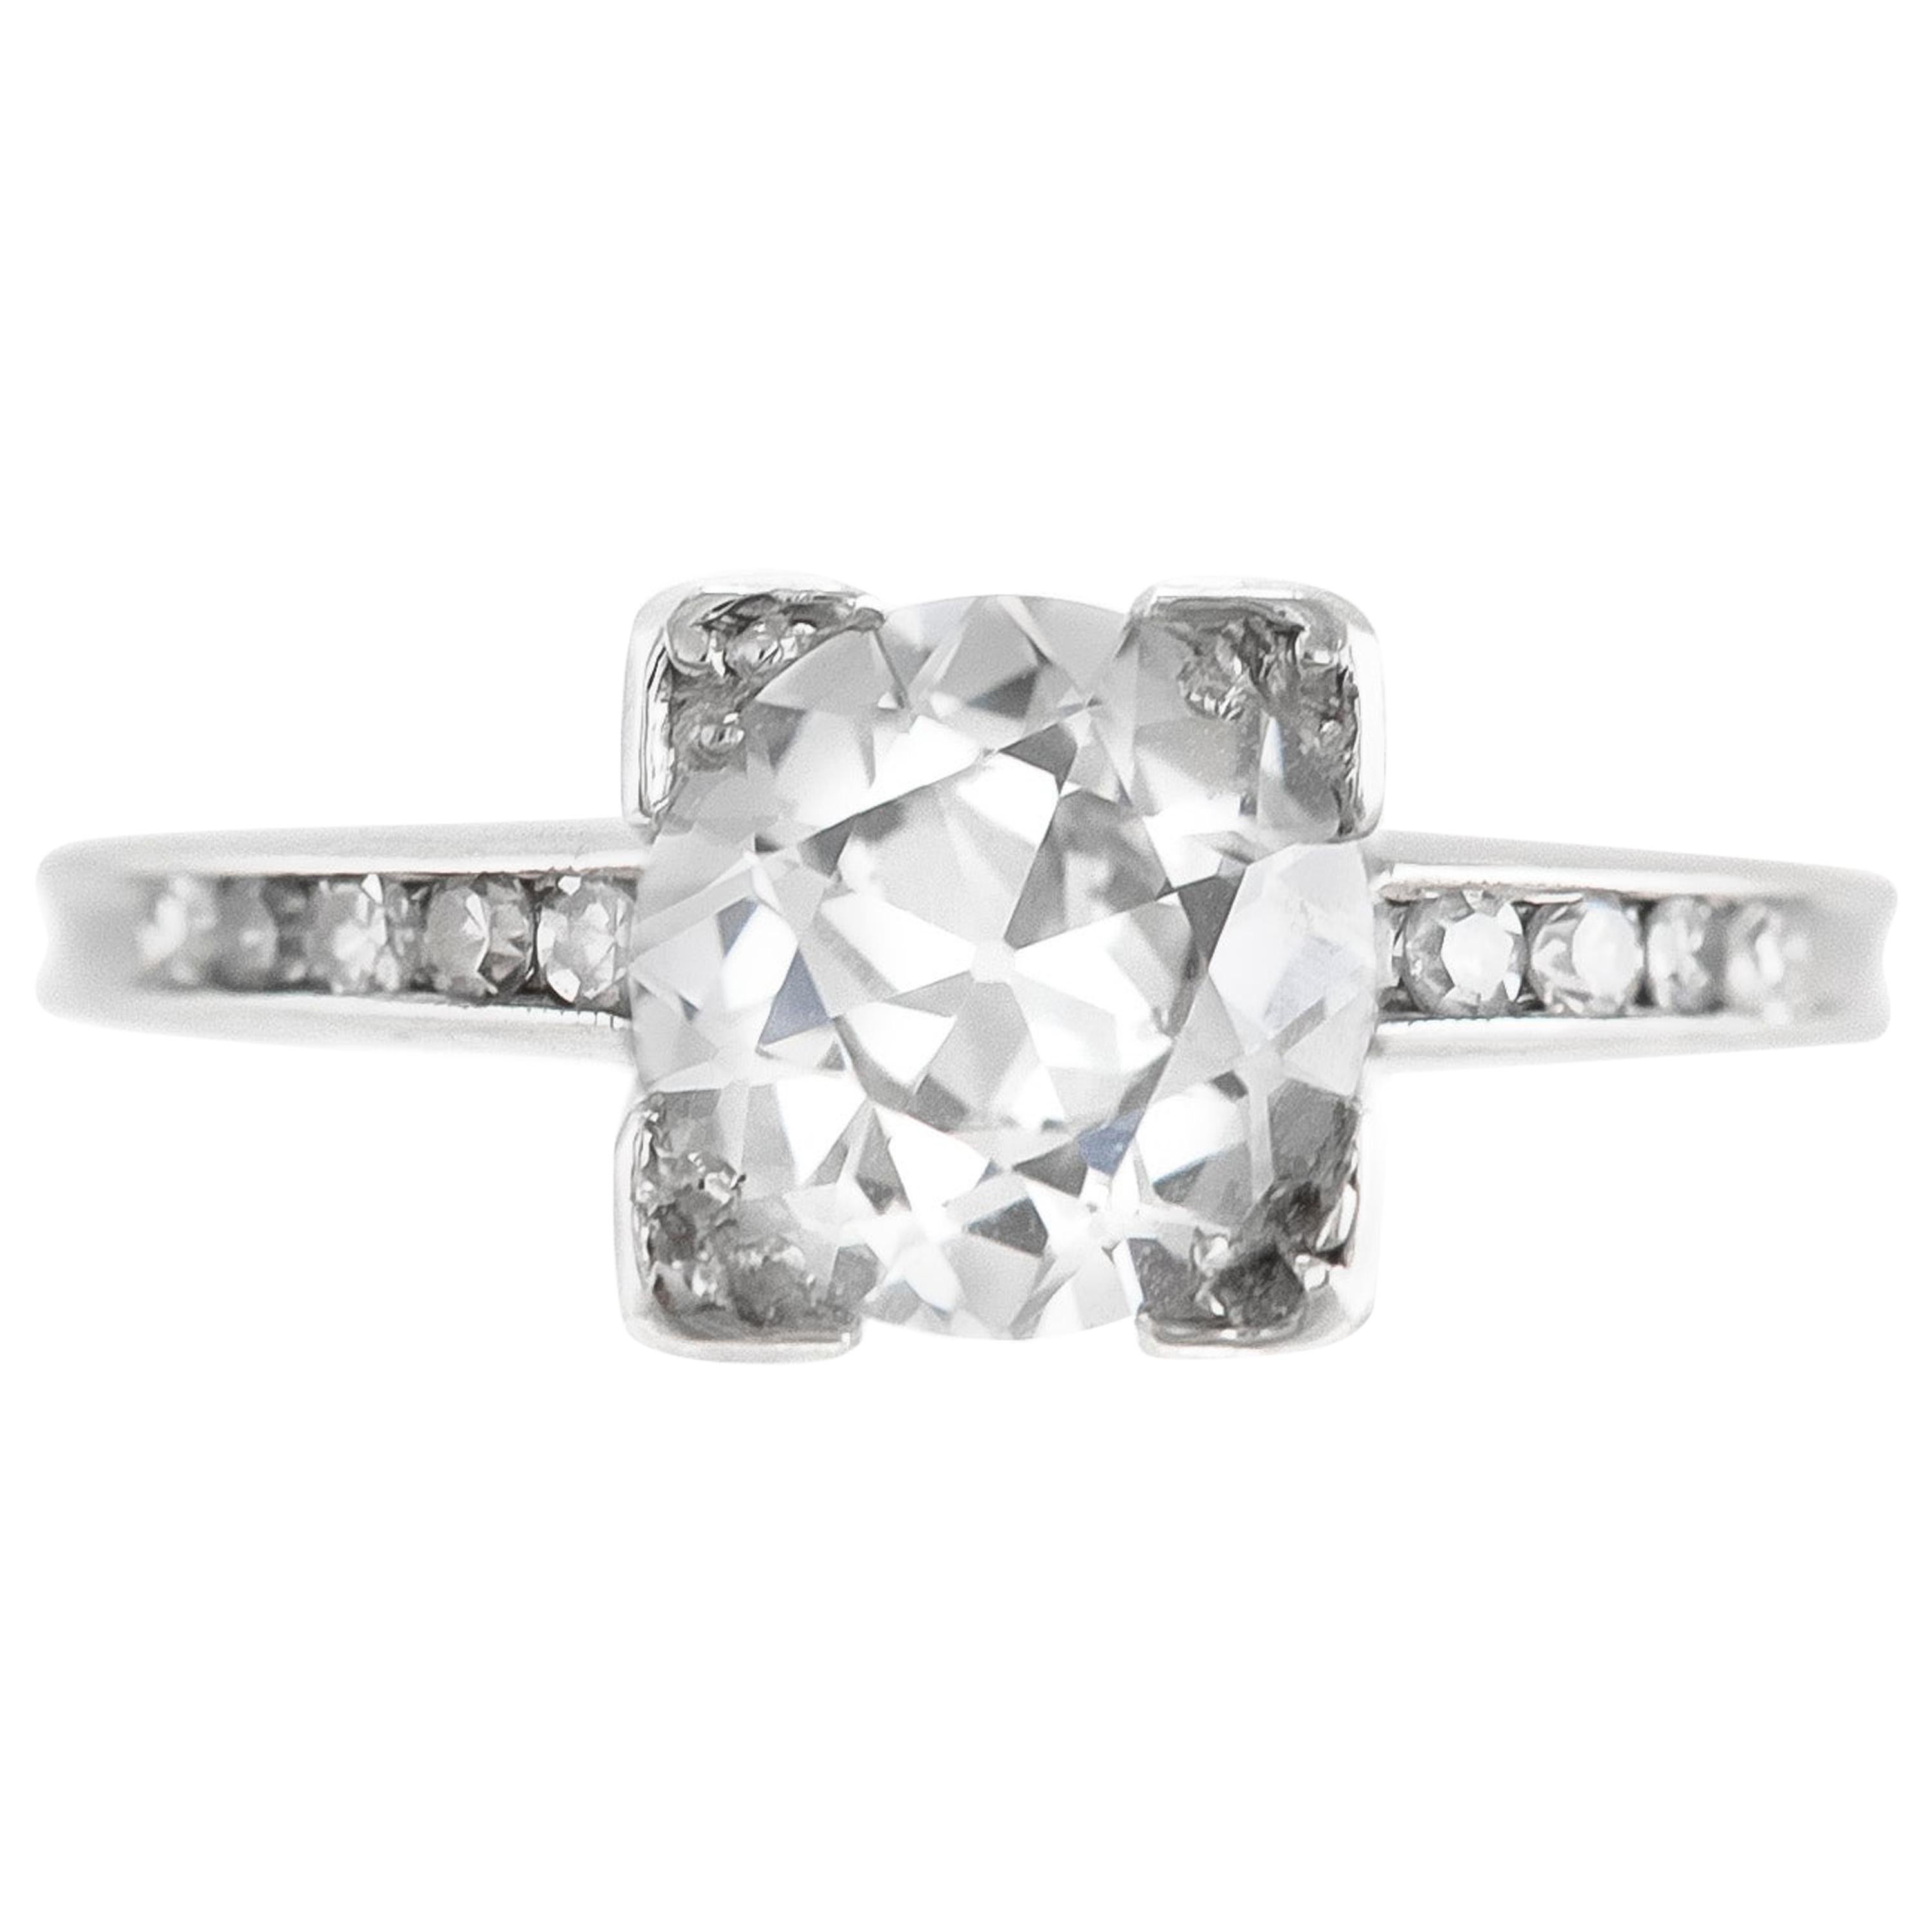 1930s Plat Engagement Ring with 1.07 Carat D VS2